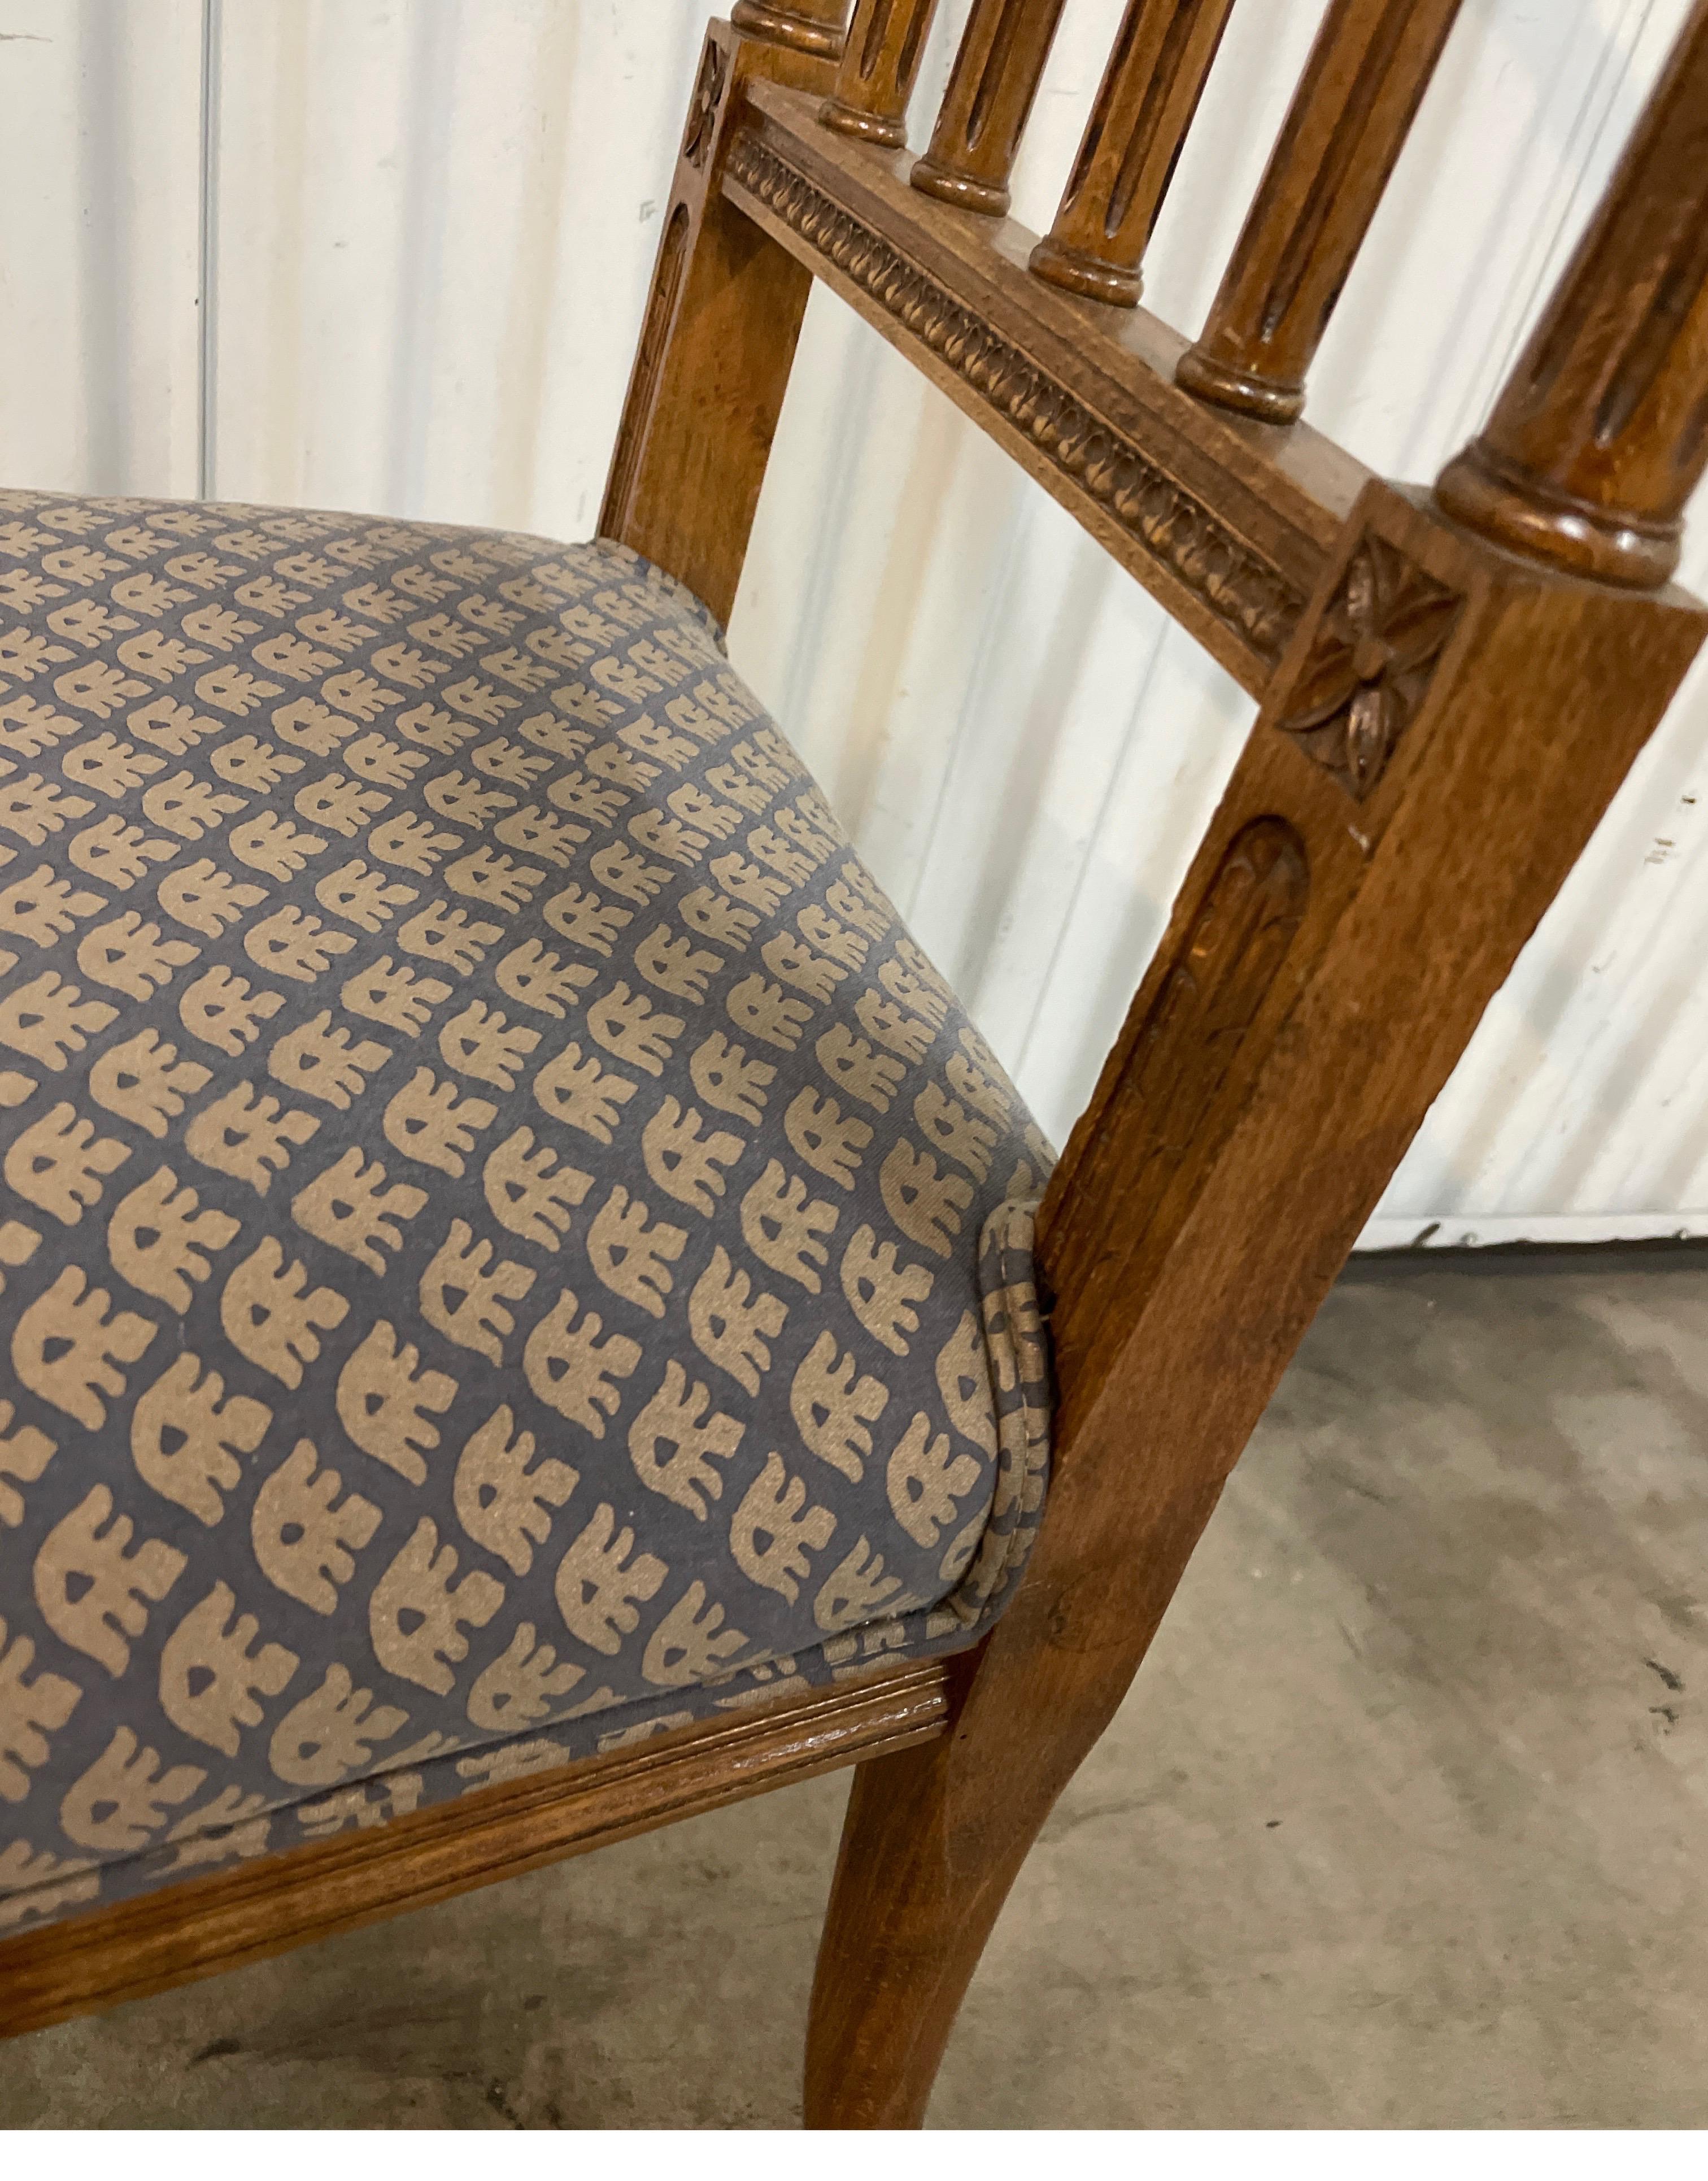 19th Century Antique Louis XVI Style Chiavari Chair with Fortuny Upholstered Seat